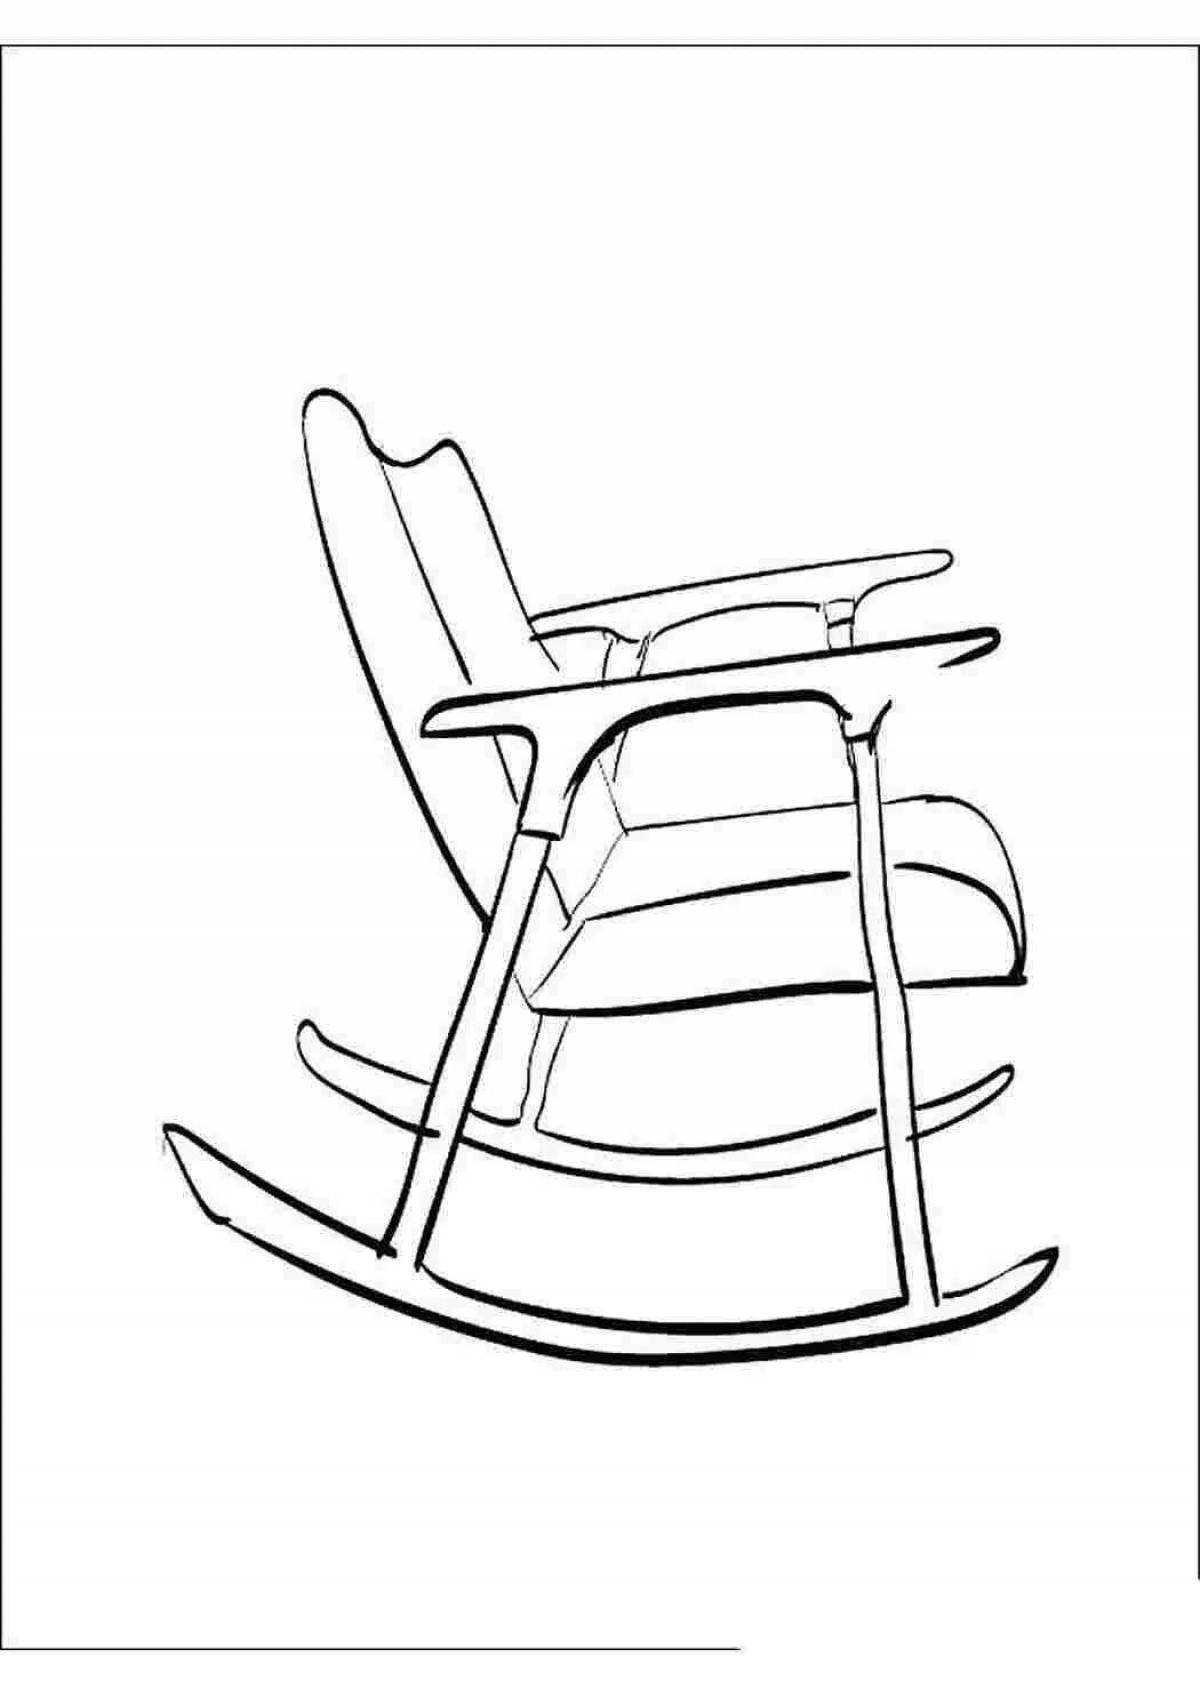 Colorful chair coloring page for 3-4 year olds